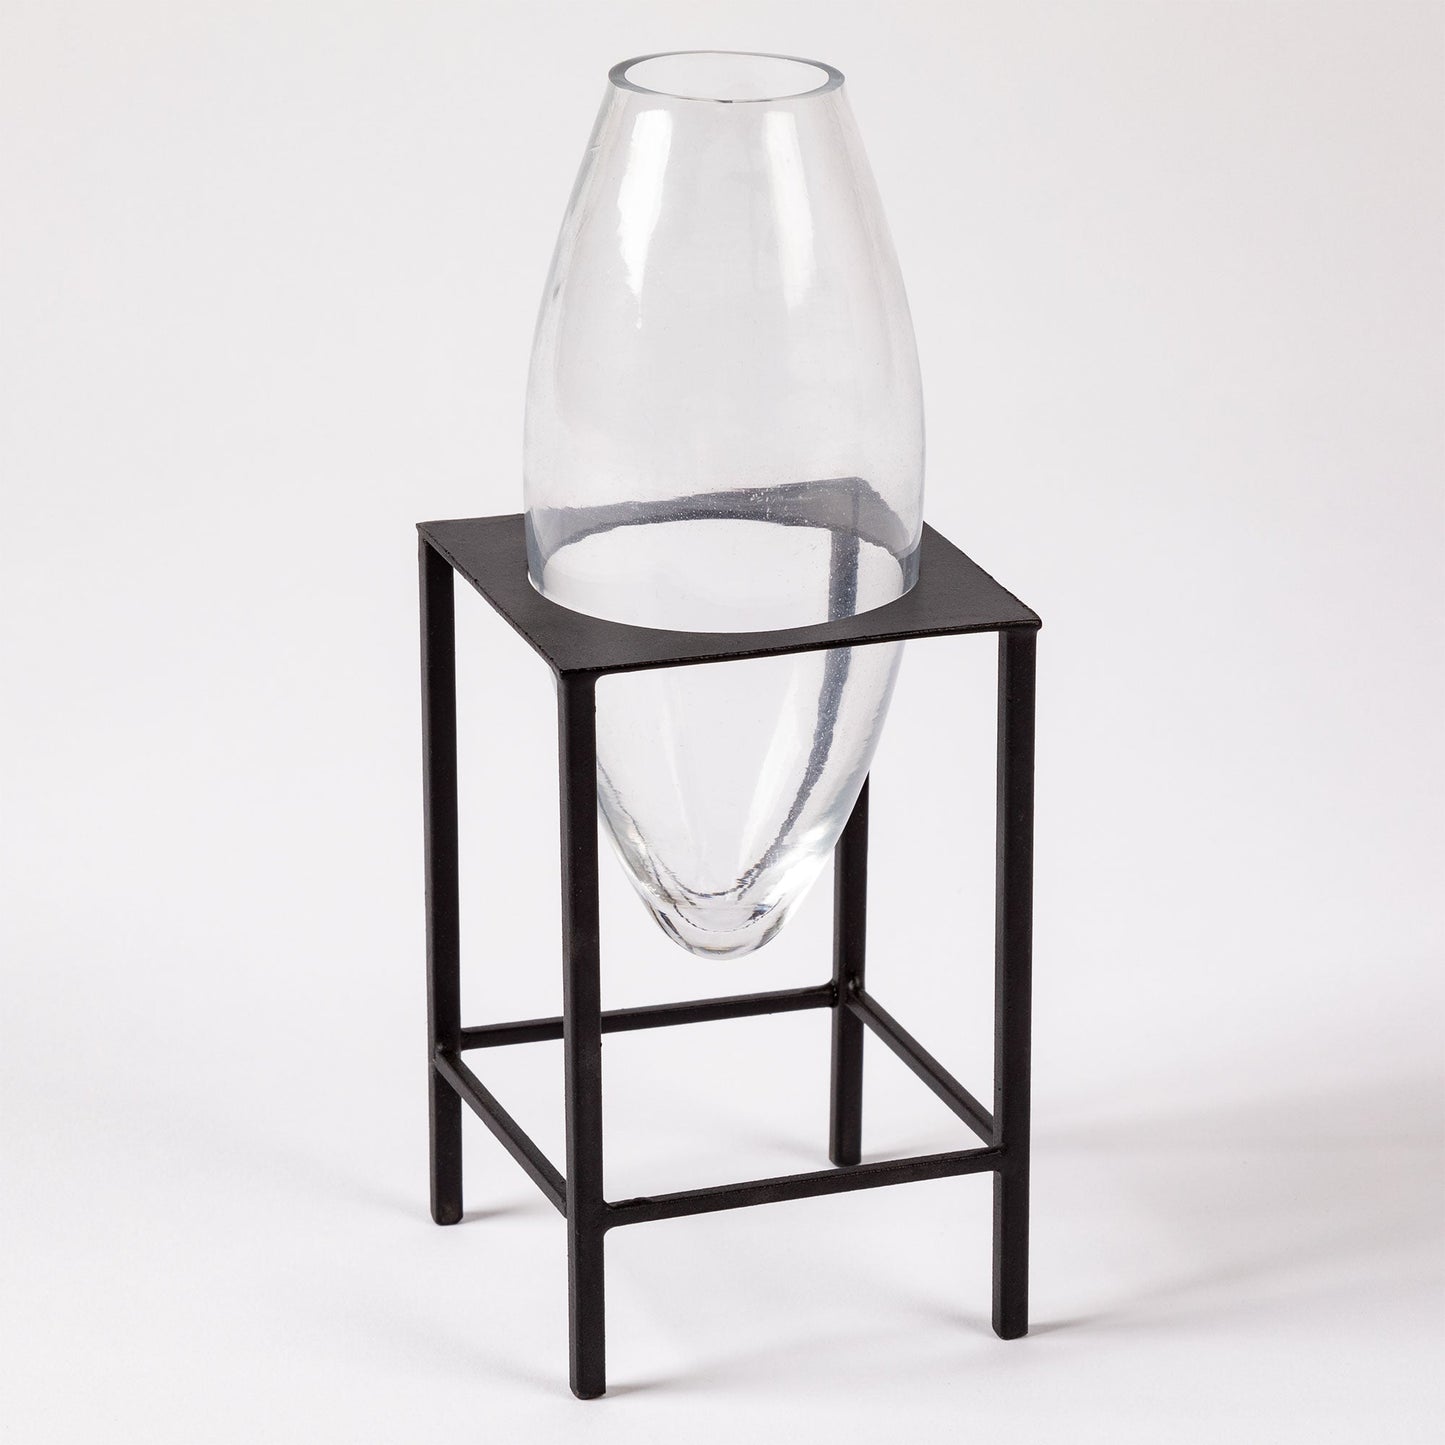 Suspended Oval Small Glass Vase